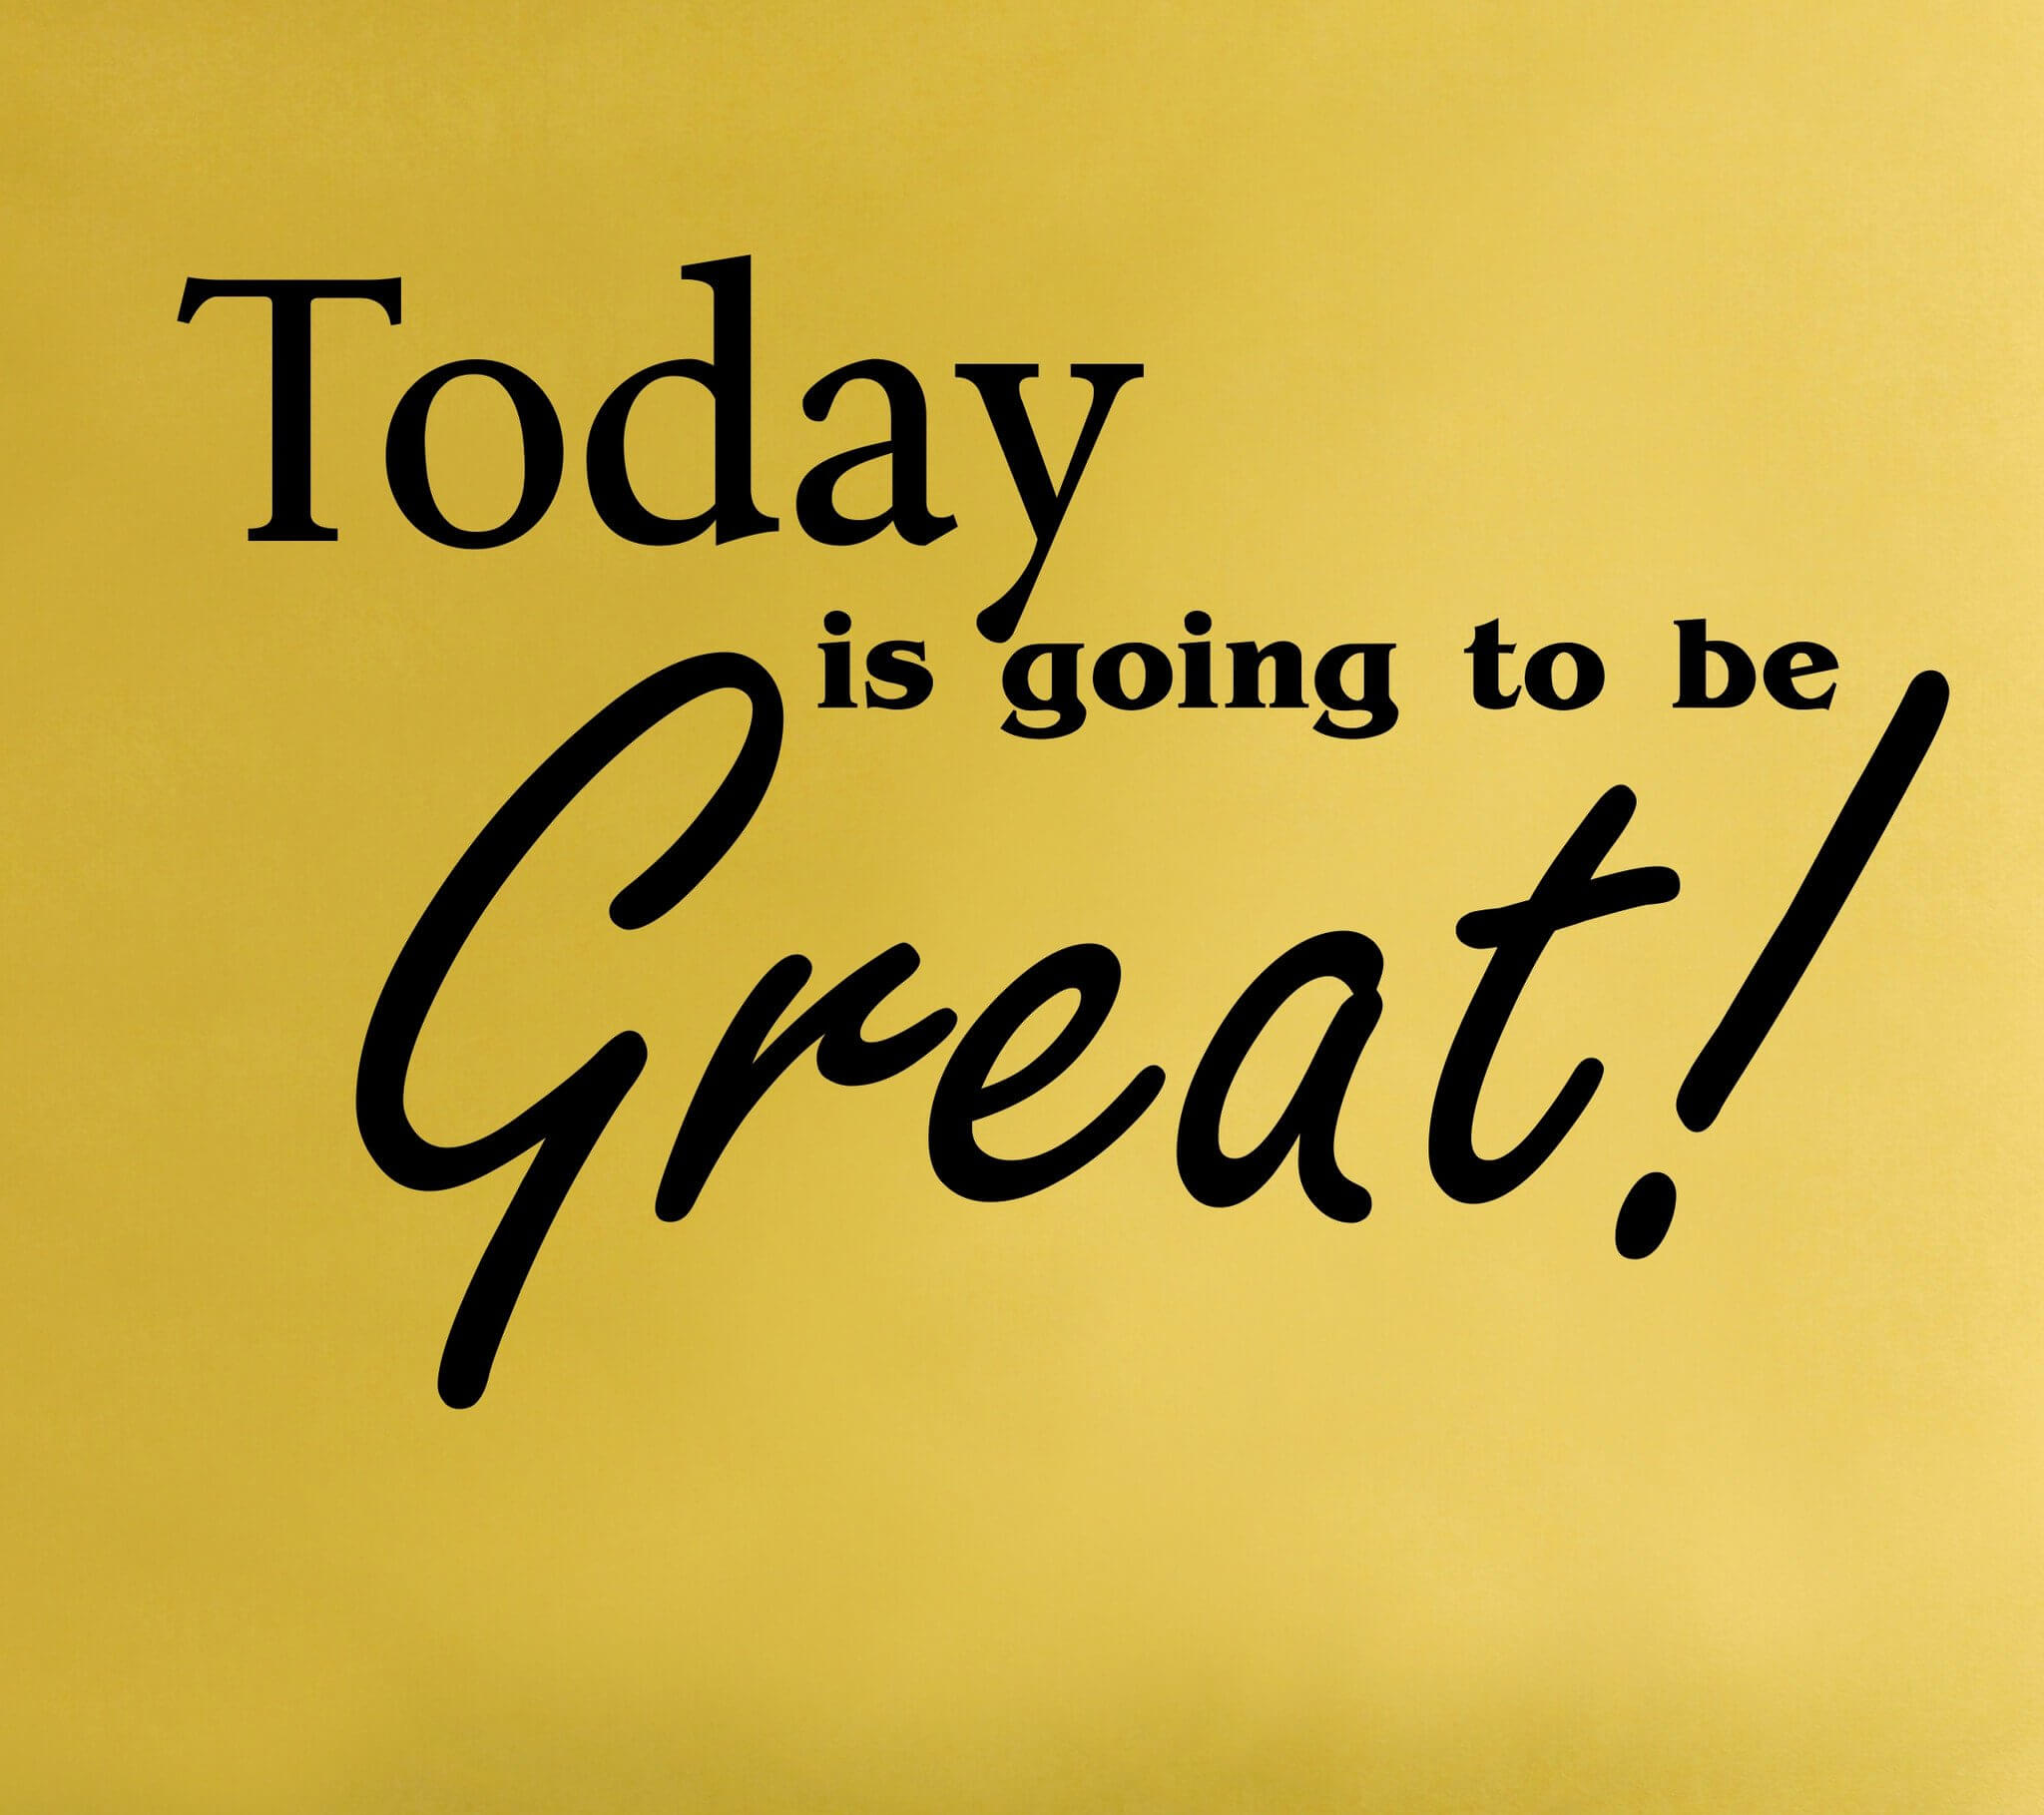 We Say To You "Have a great day!" 24 Times And You're Going To Have a